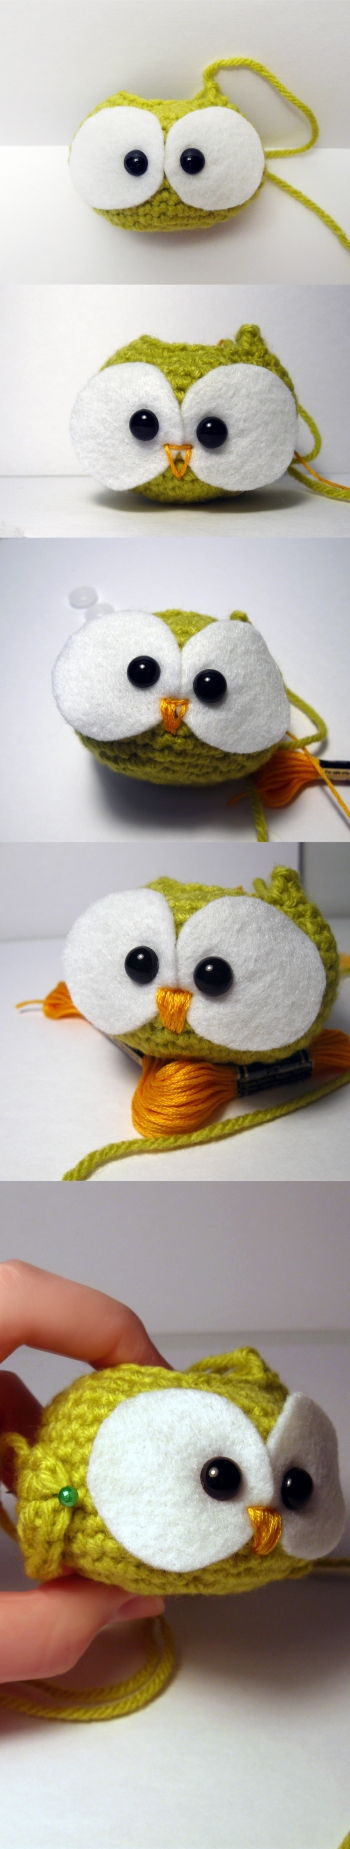 Position eyes, embroider face, (secure eyes), attach wings, and stuff